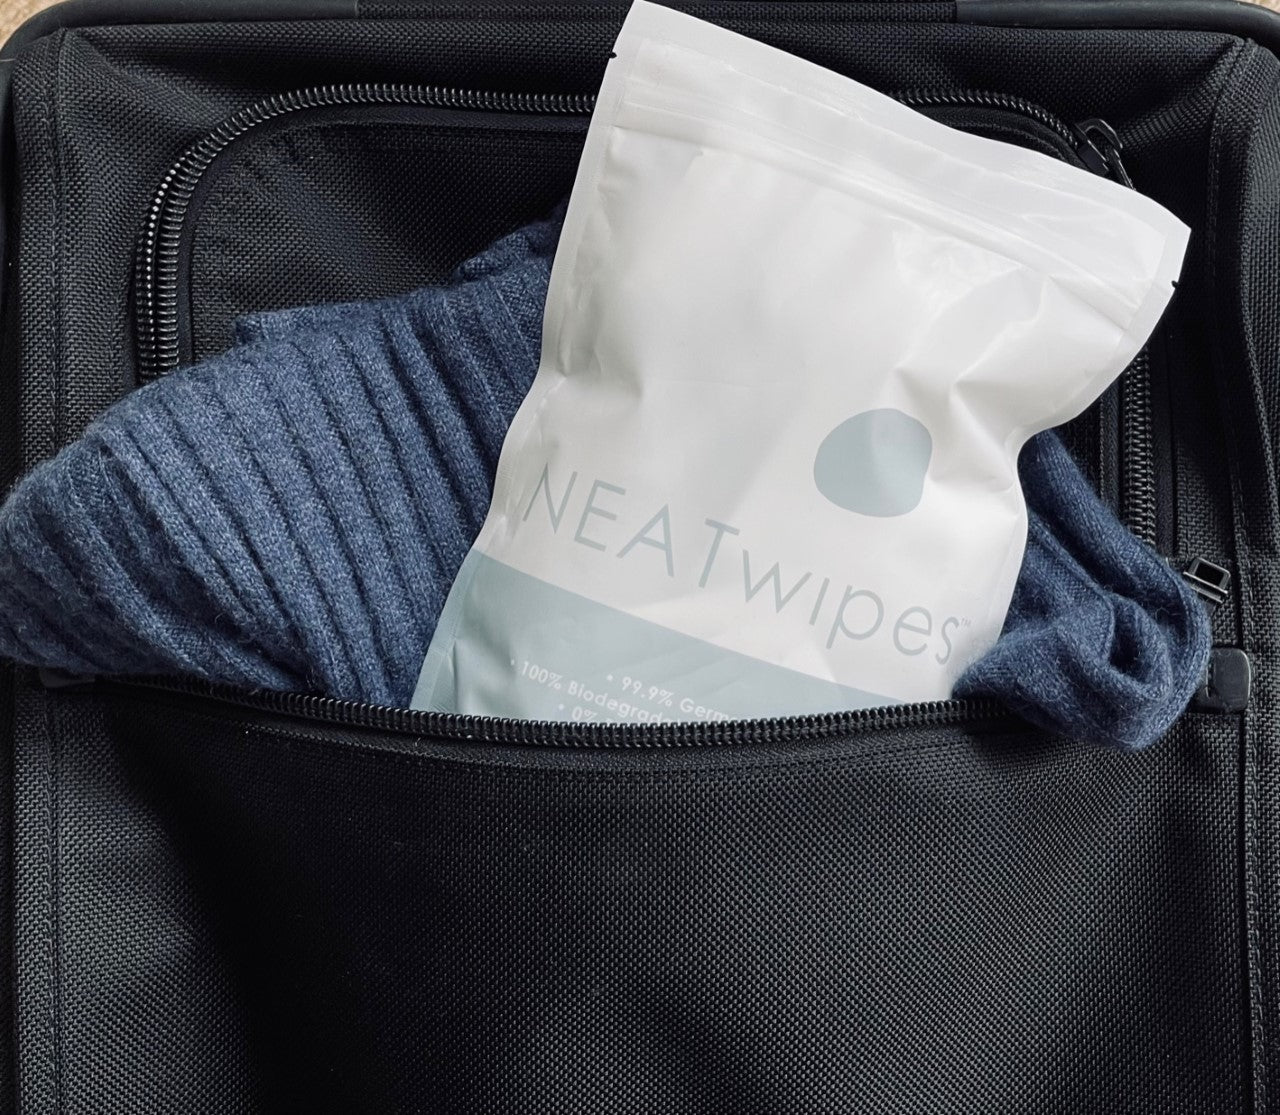 A pouch of NEATwipes hand wipes in a travel bag.